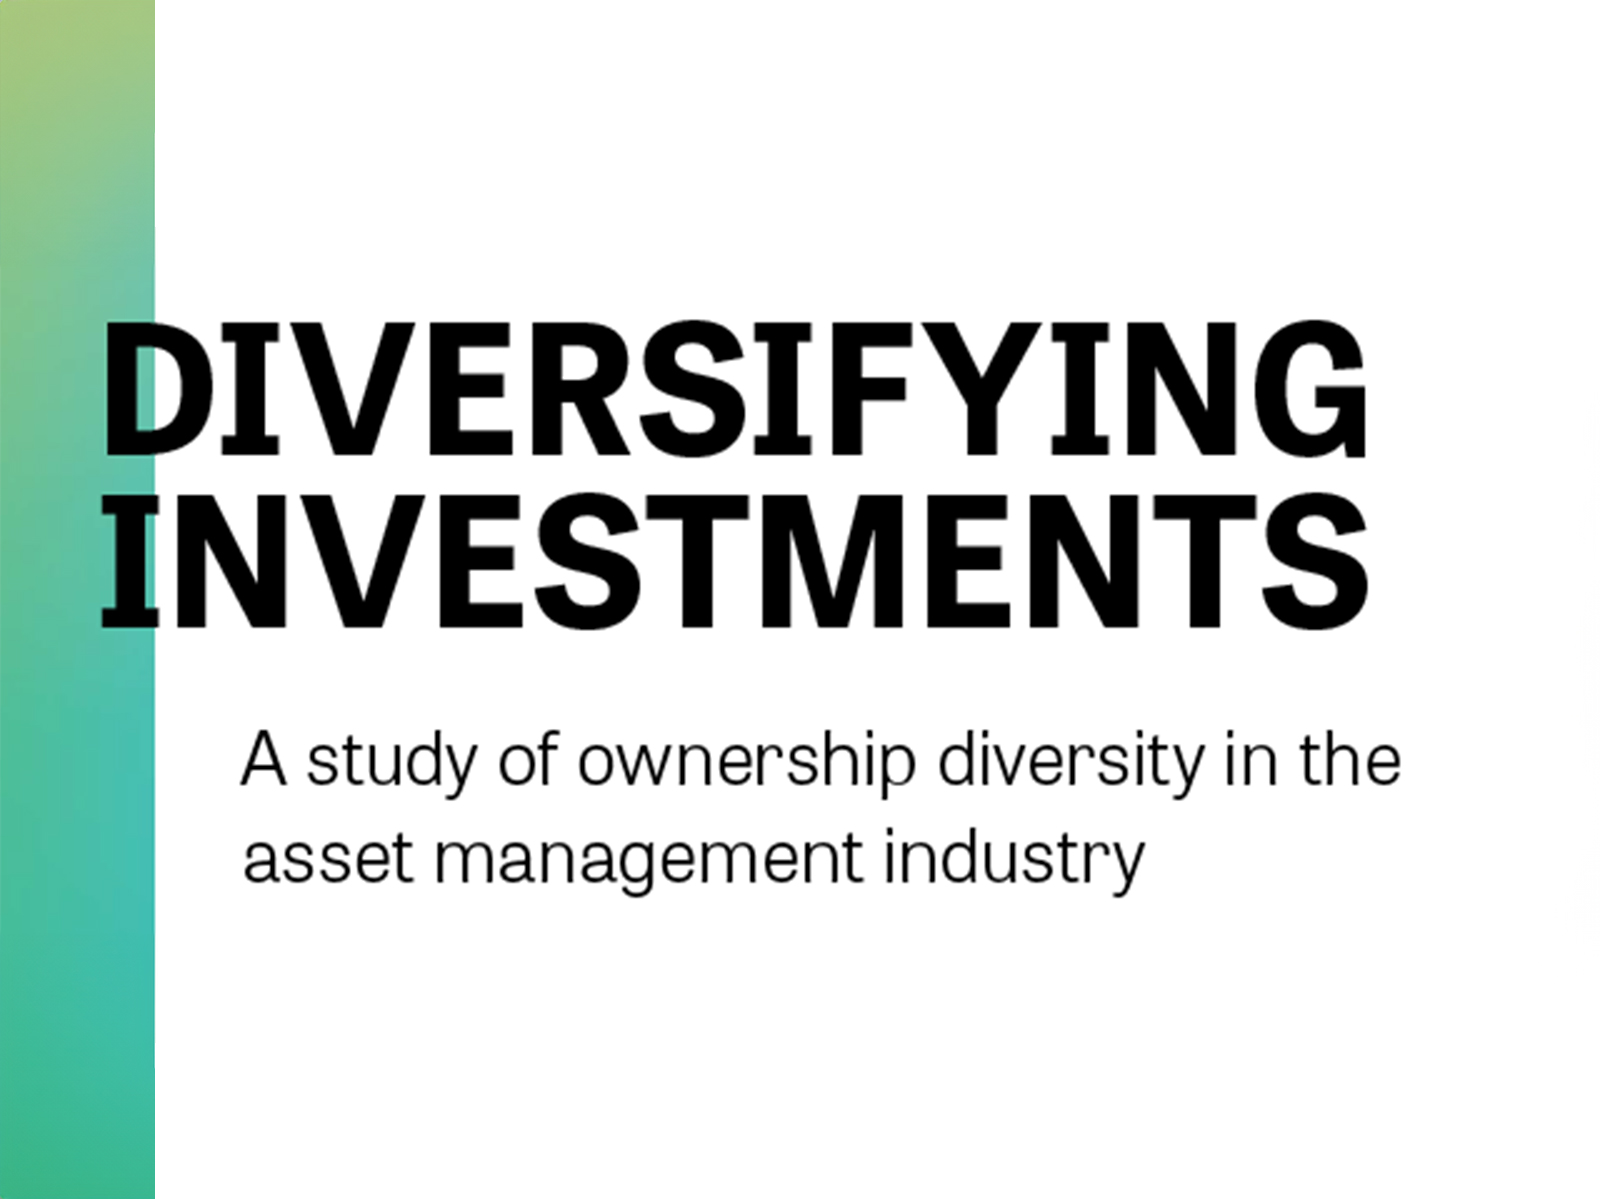 Knight Diversity of Asset Managers Research Series, 2017 Industry Report Graphic. Text reads: "Diversifying Investments" and "A study of ownership diversity in the asset management industry".